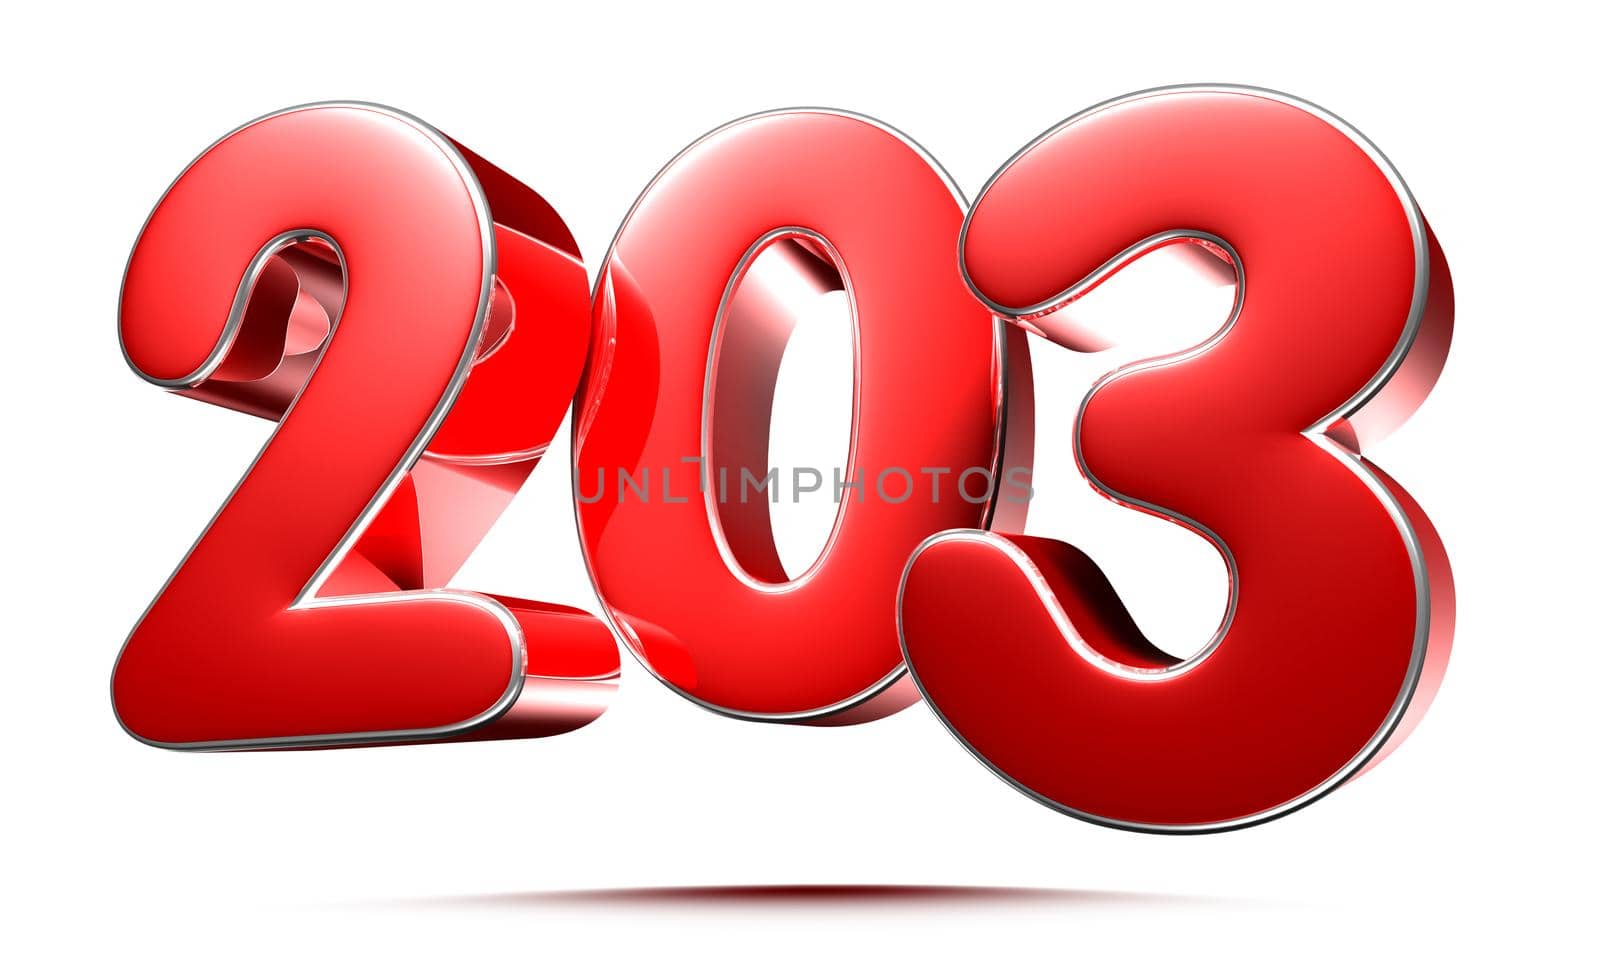 Rounded red numbers 203 on white background 3D illustration with clipping path by thitimontoyai